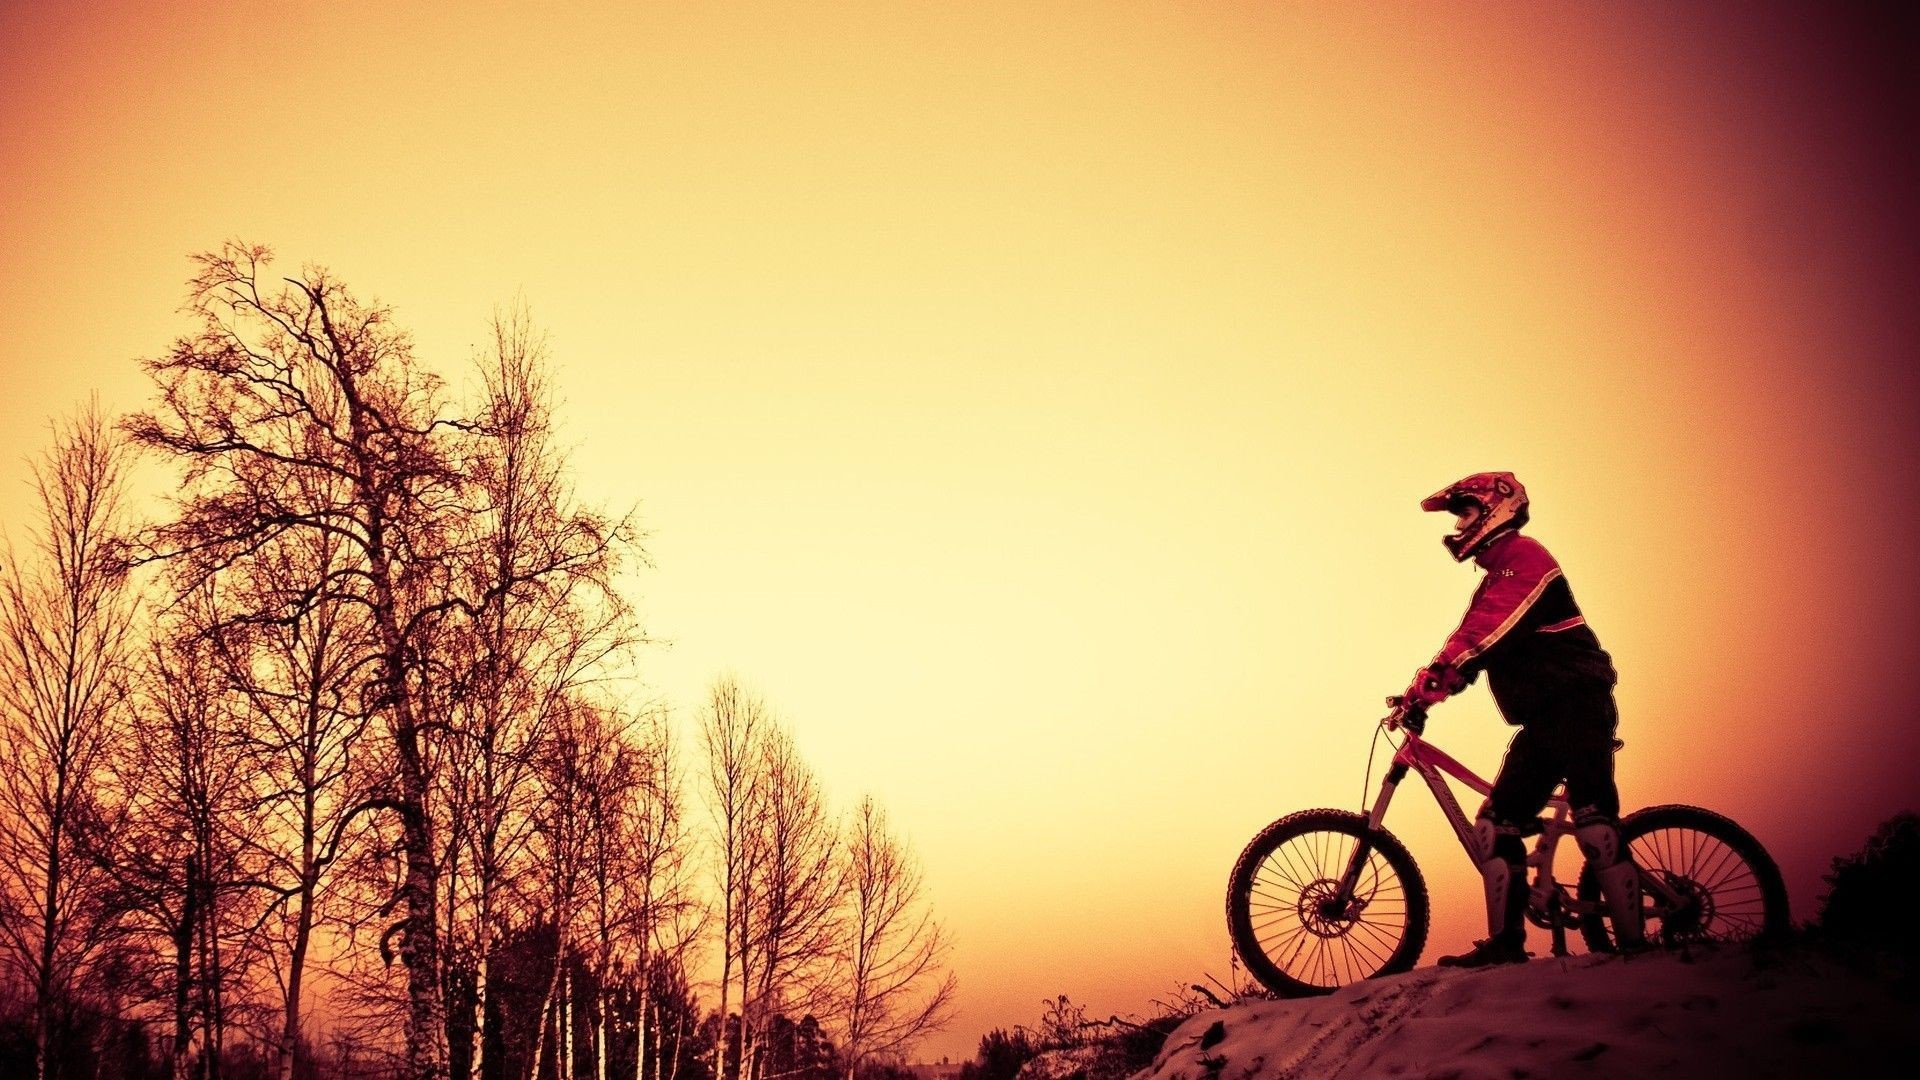 1920x1080 Cycling in Winter Wallpaper Free Cycling in Winter Wallpaper By .